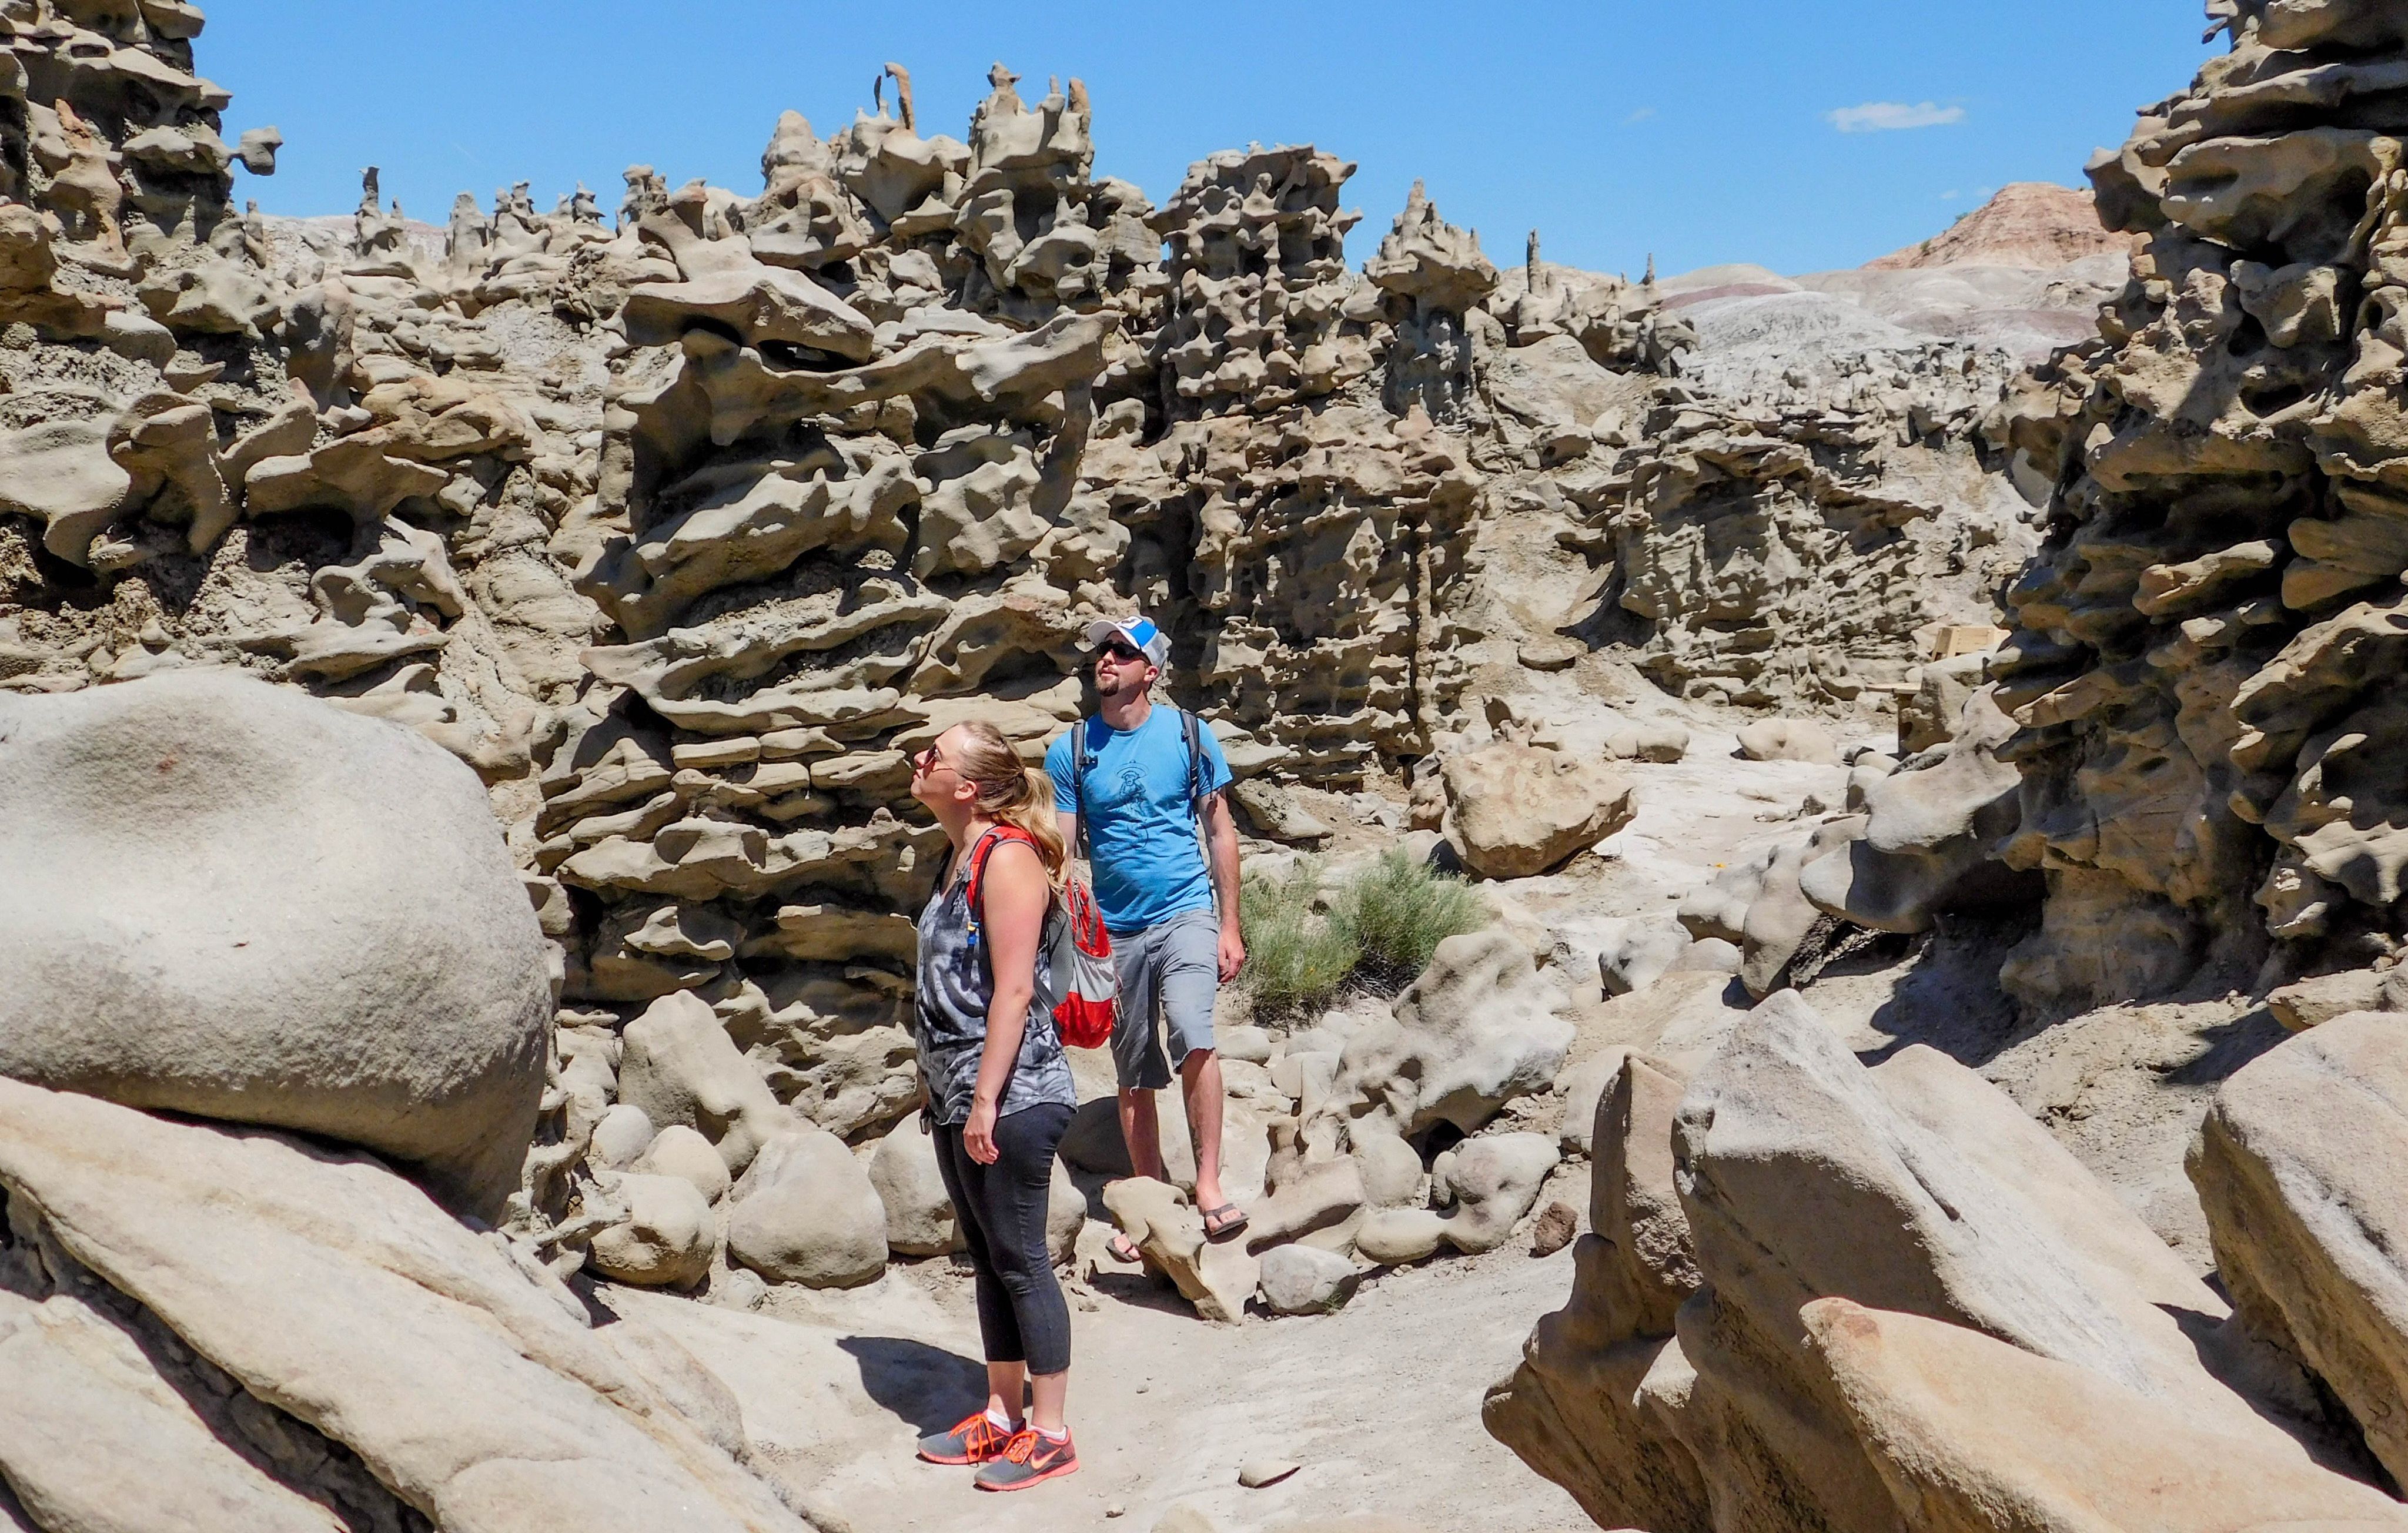 Hikers admire squiggly rock formations in the desert.